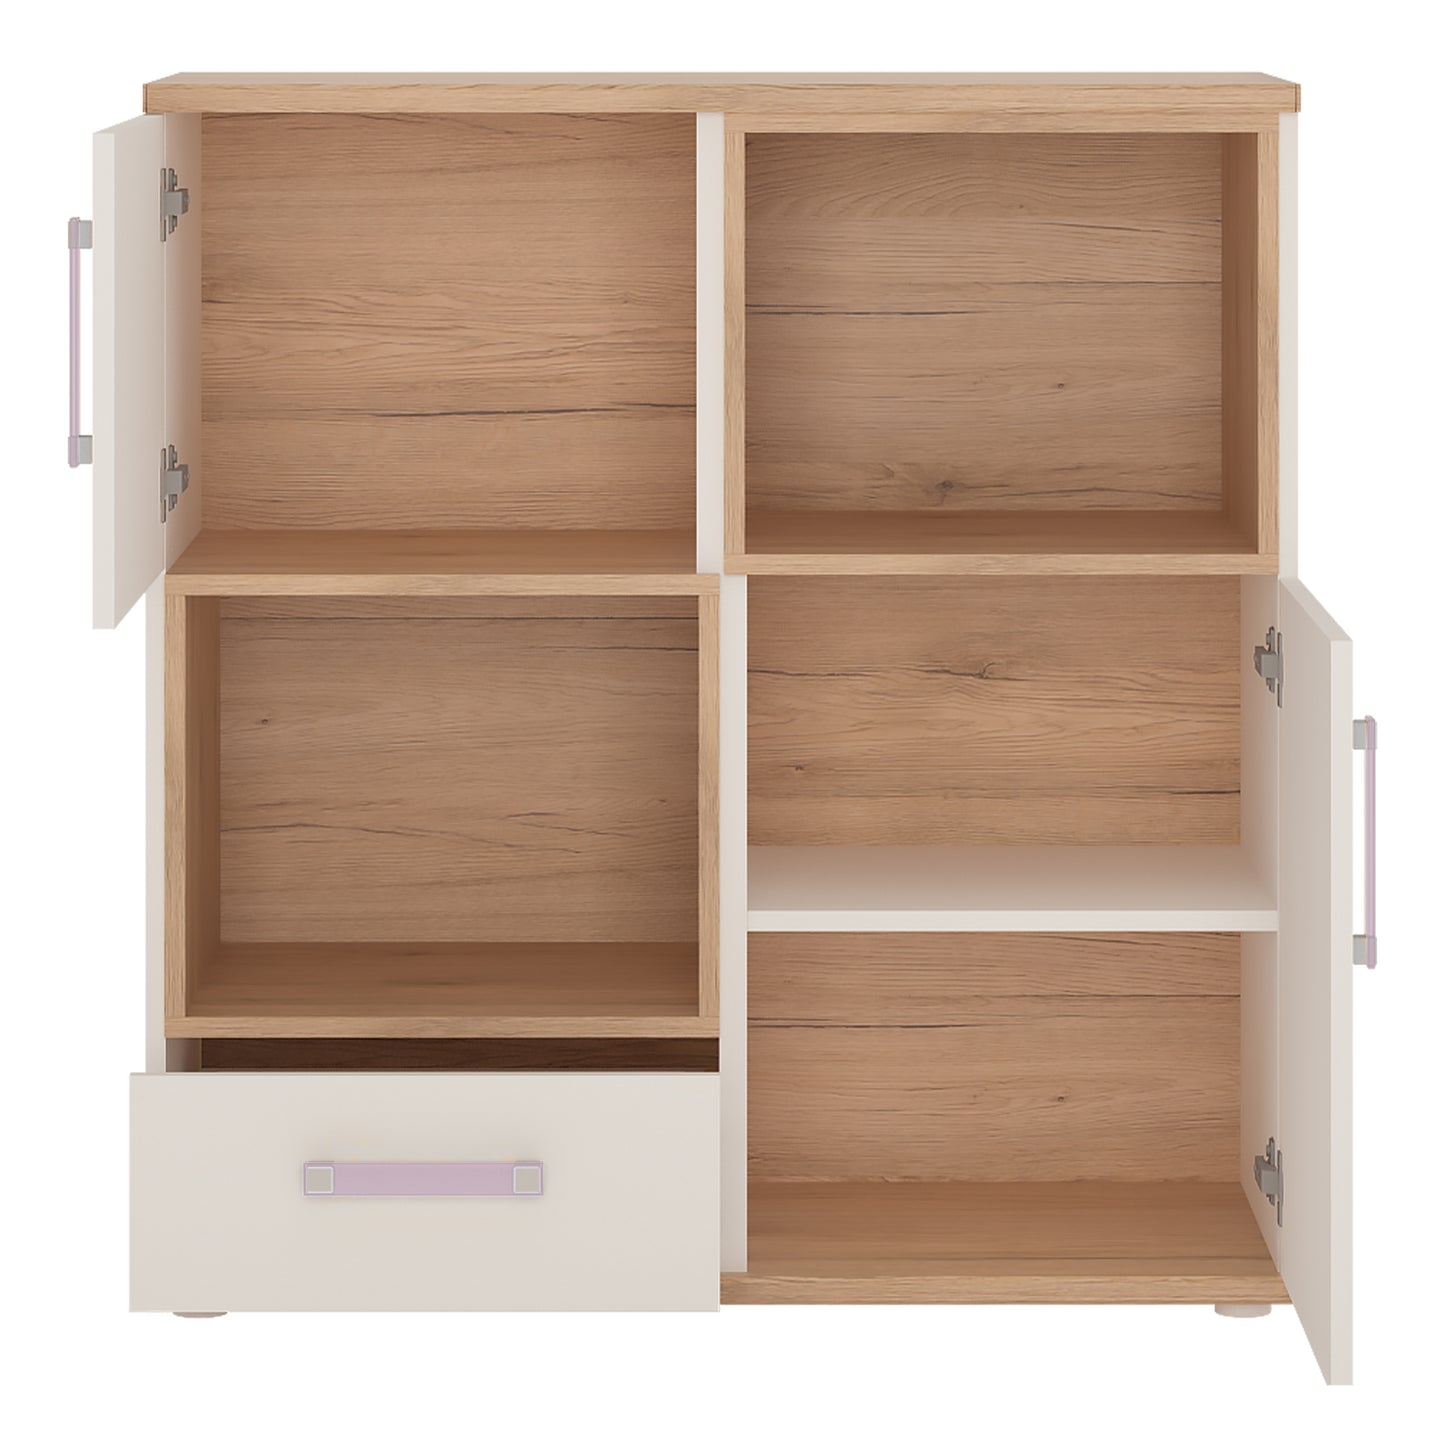 4Kids  2 Door 1 Drawer Cupboard with 2 open shelves in Light Oak and white High Gloss (lilac handles)